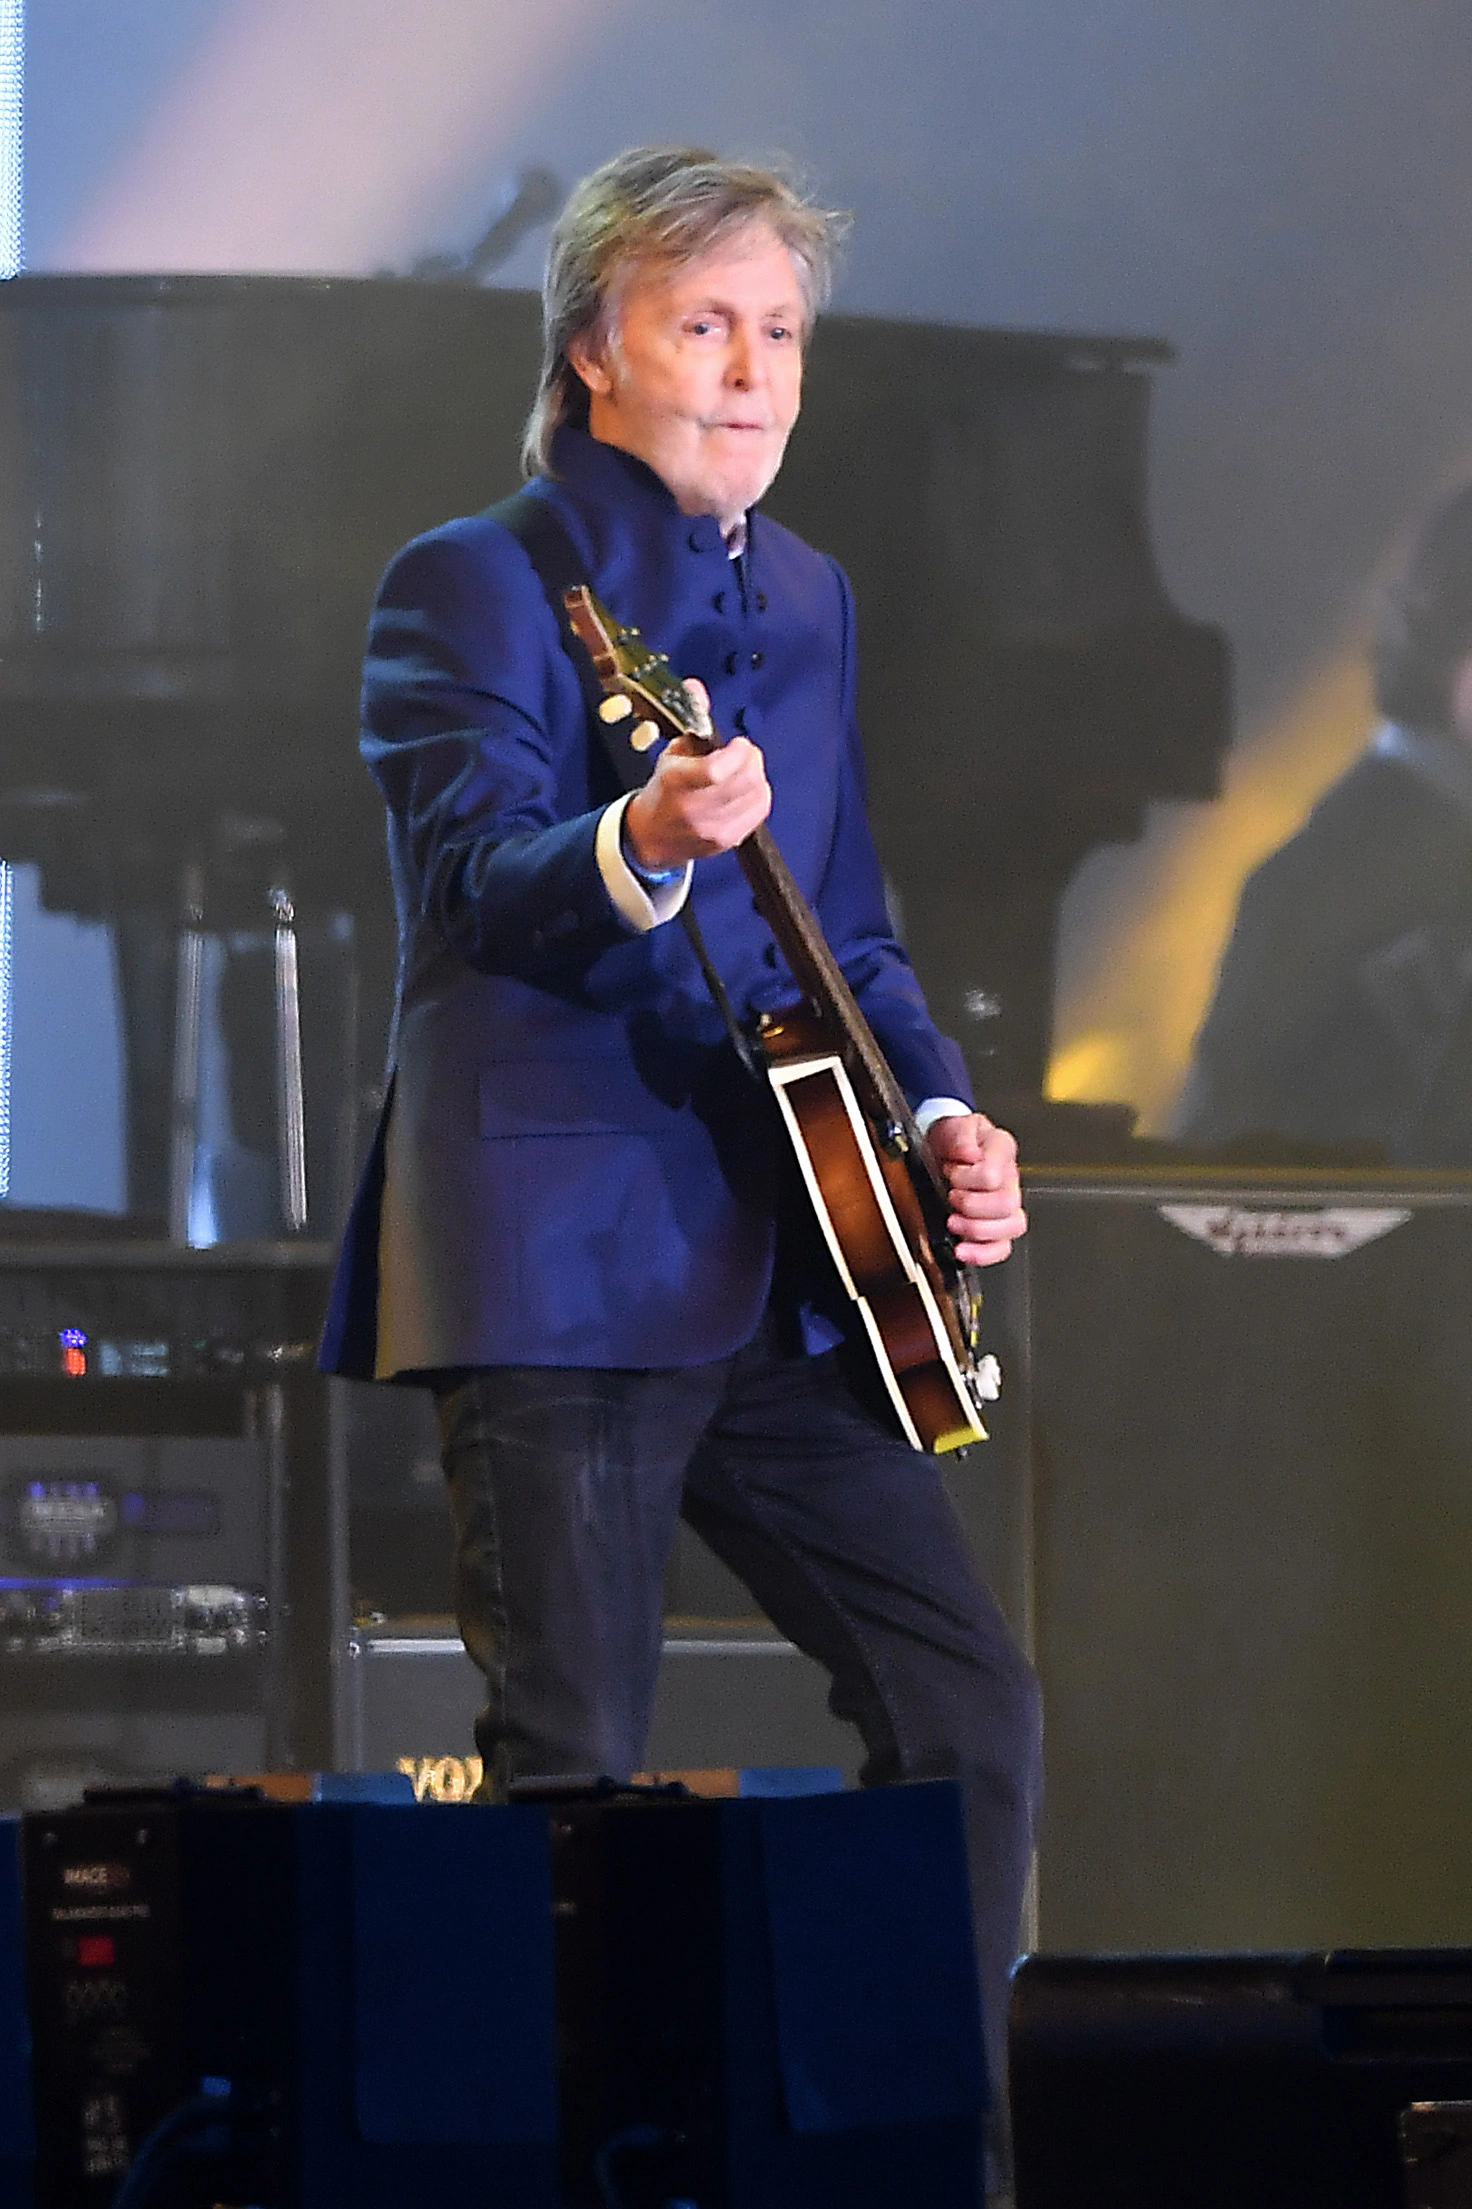 1472x2209 Paul McCartney makes history performing on the Glastonbury Festival stage at 80: See his life in photos | Gallery